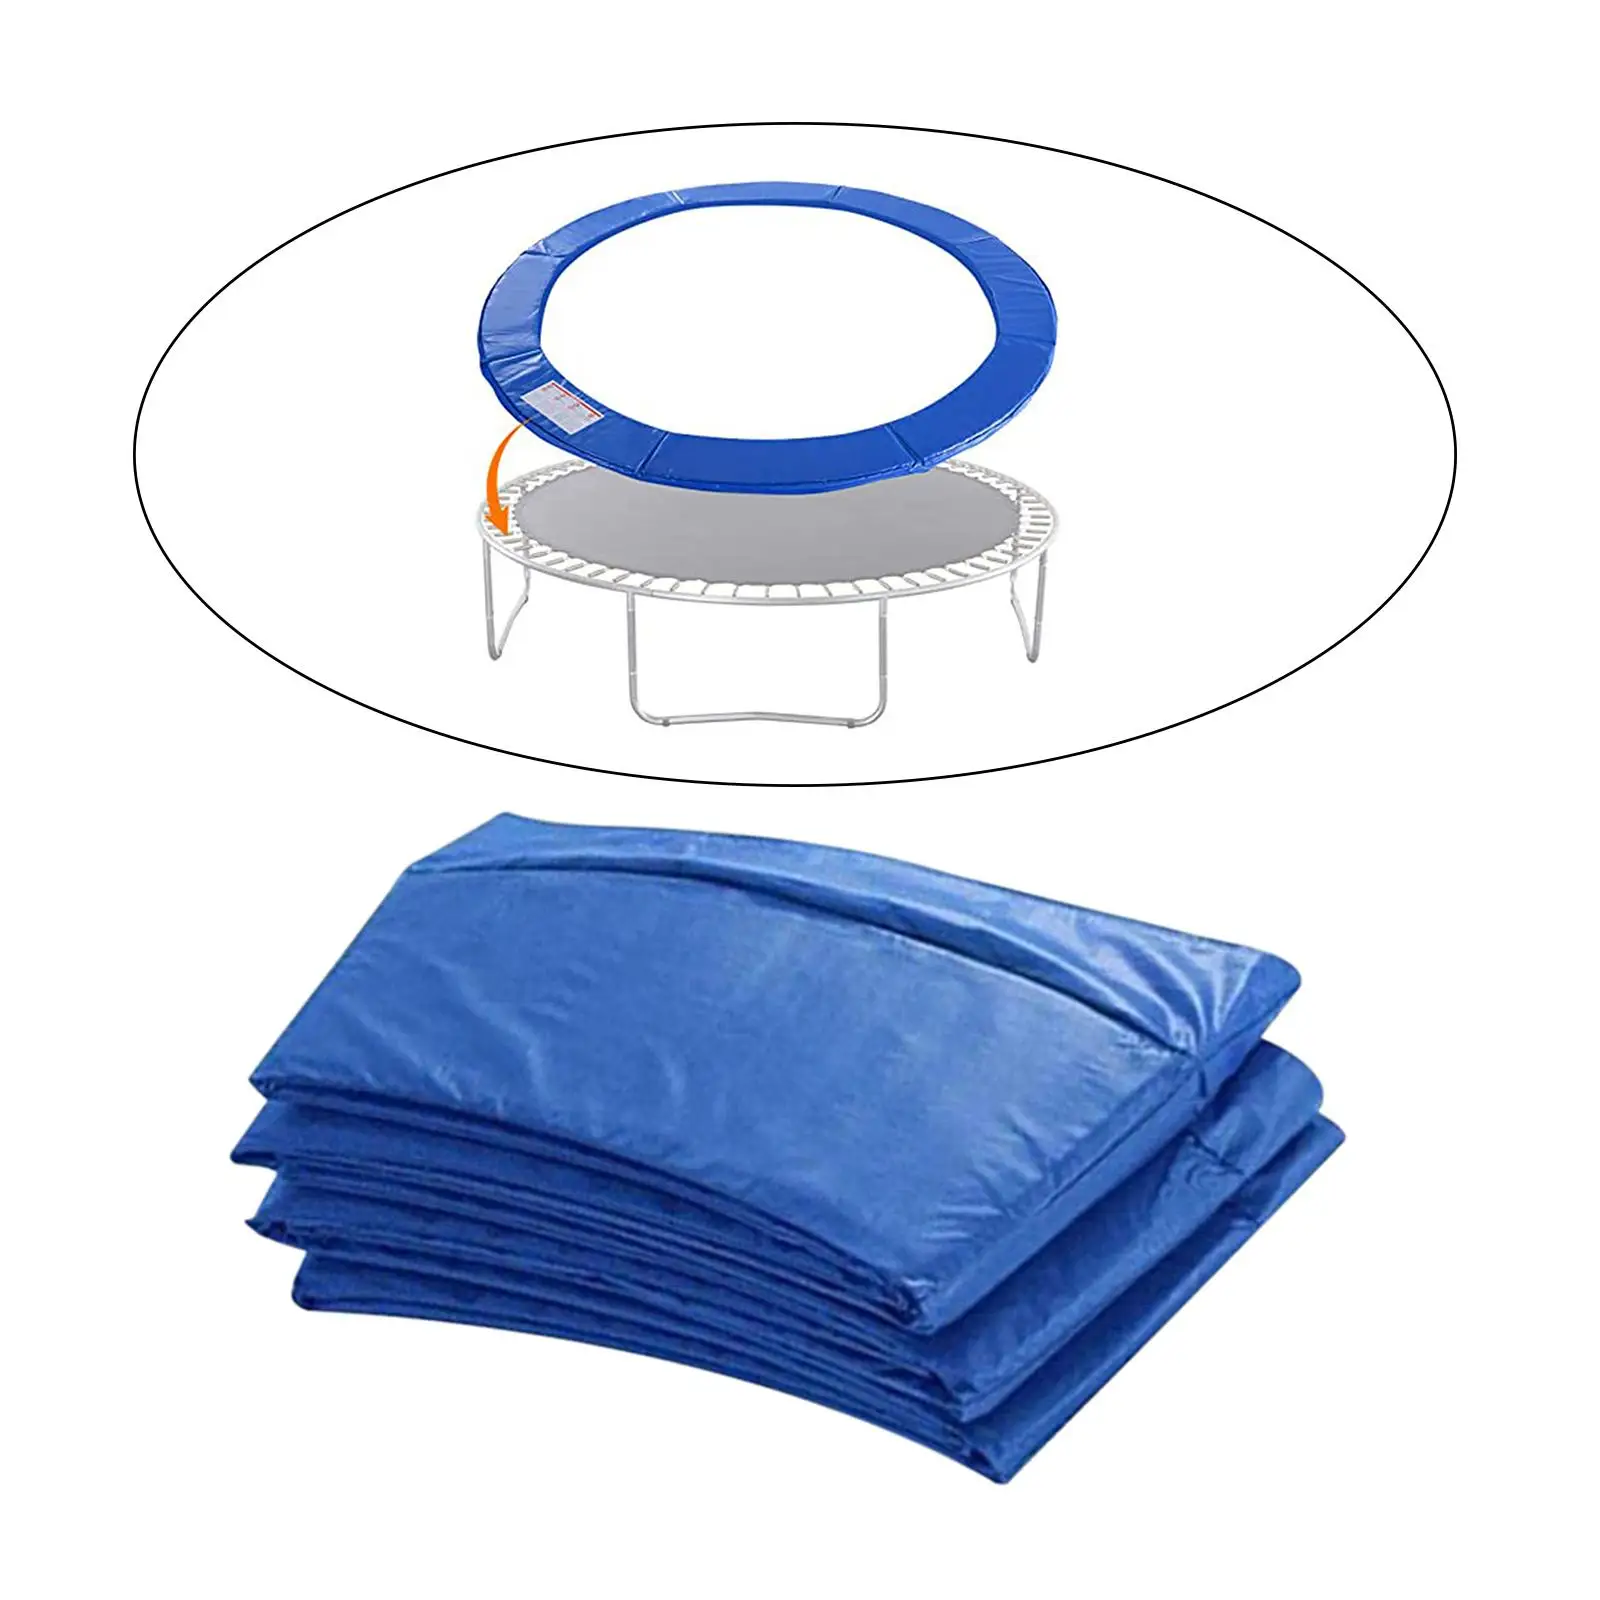 Trampoline Pad Side Guard Fits Round Trampoline 12ft Jumping Bed Side Cover Epe Pad Waterproof No Holes for Pole Spring Cover